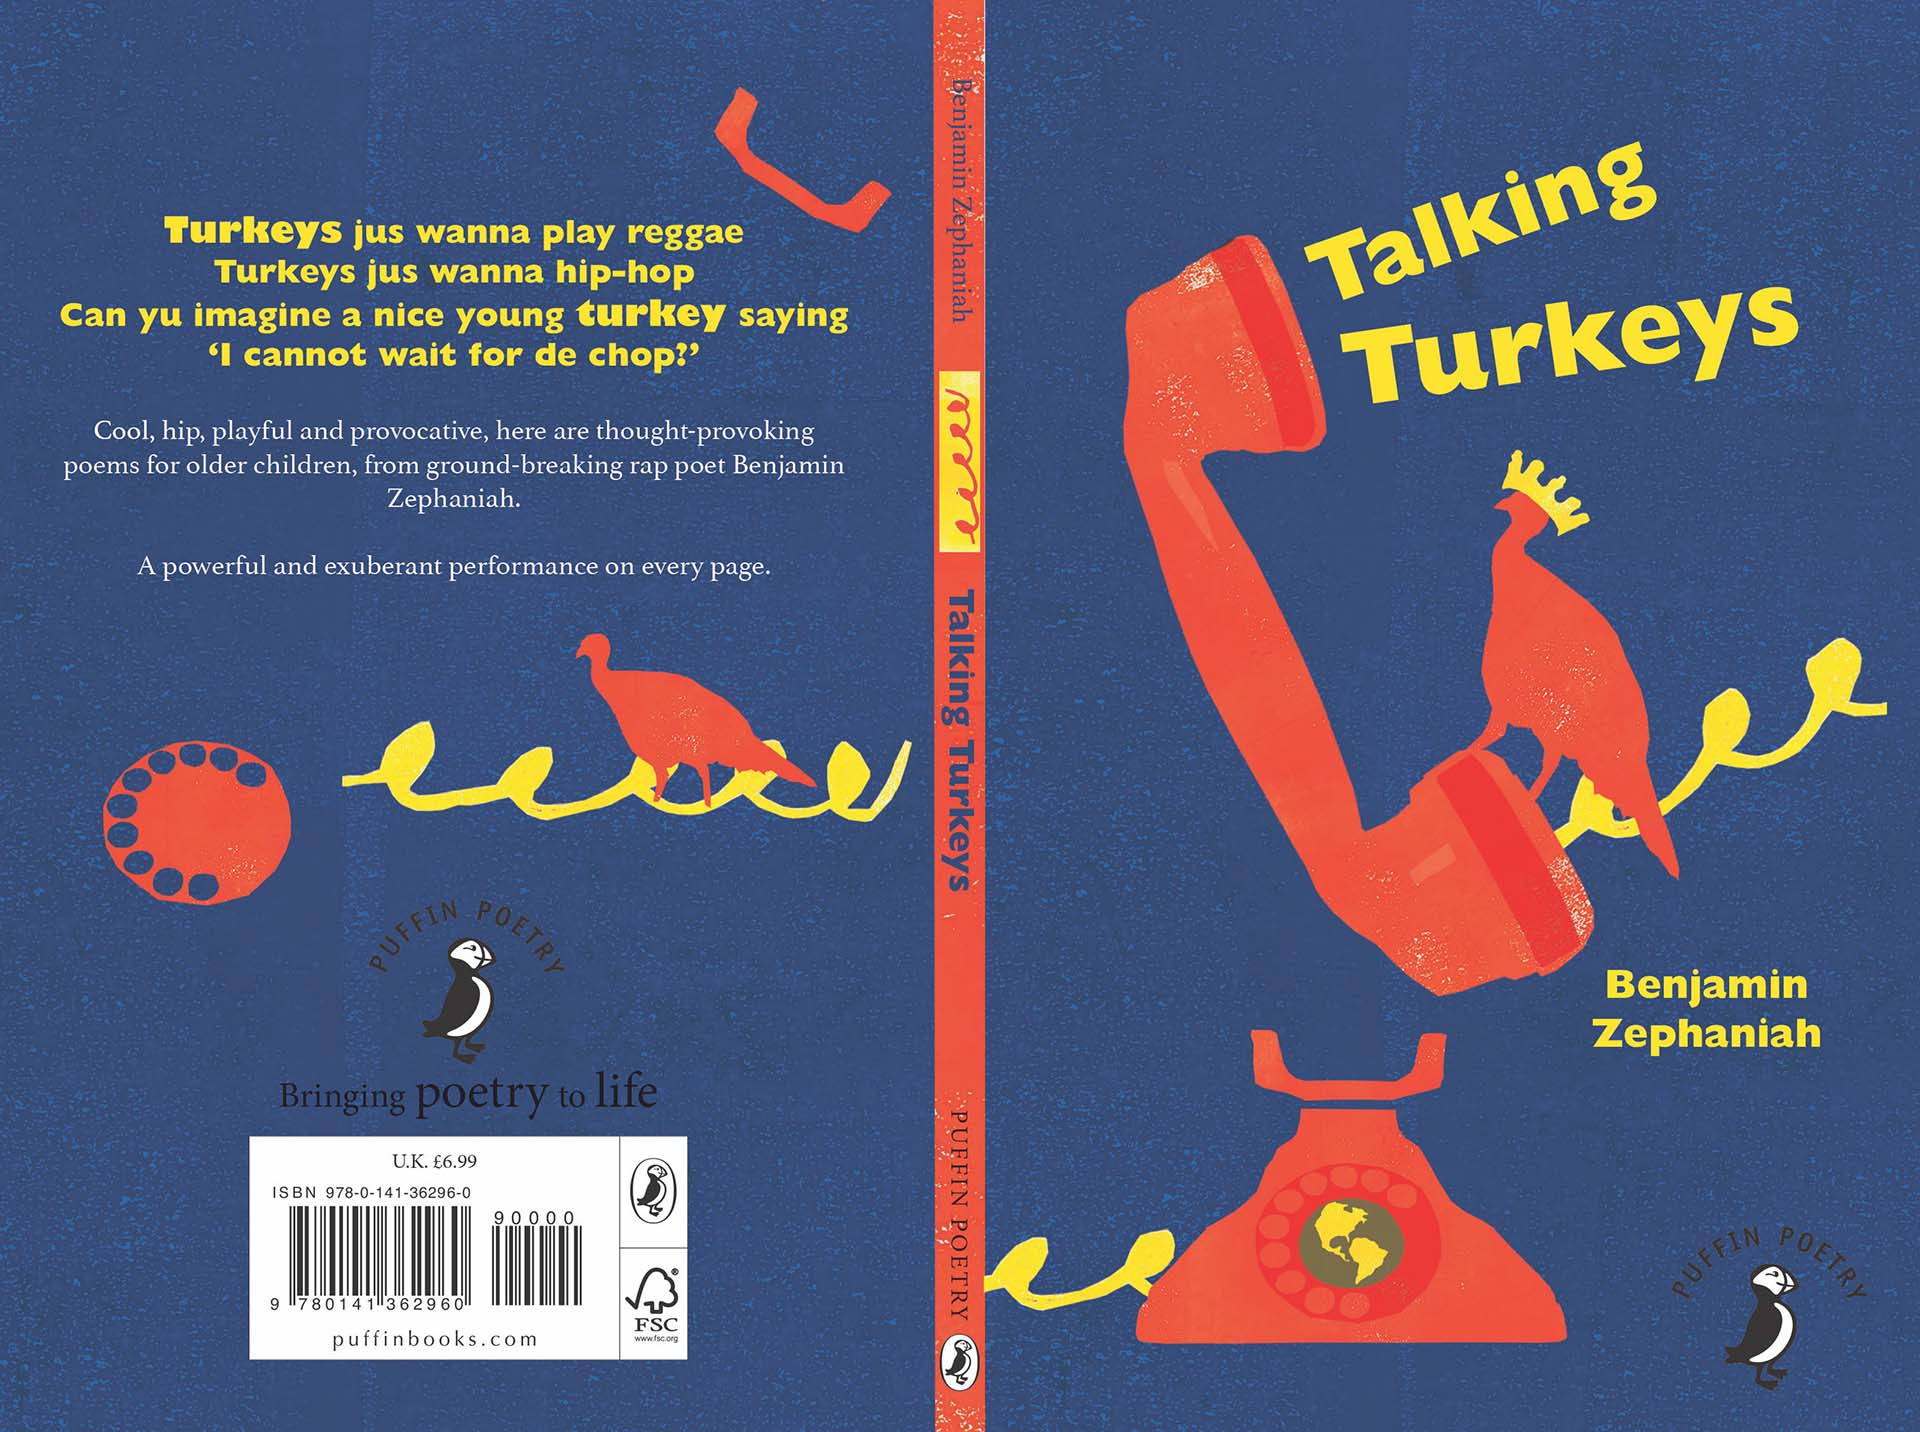 A book cover for "Talking Turkeys" in the colour scheme of orange and blue. A turkey speaks into the phone. 